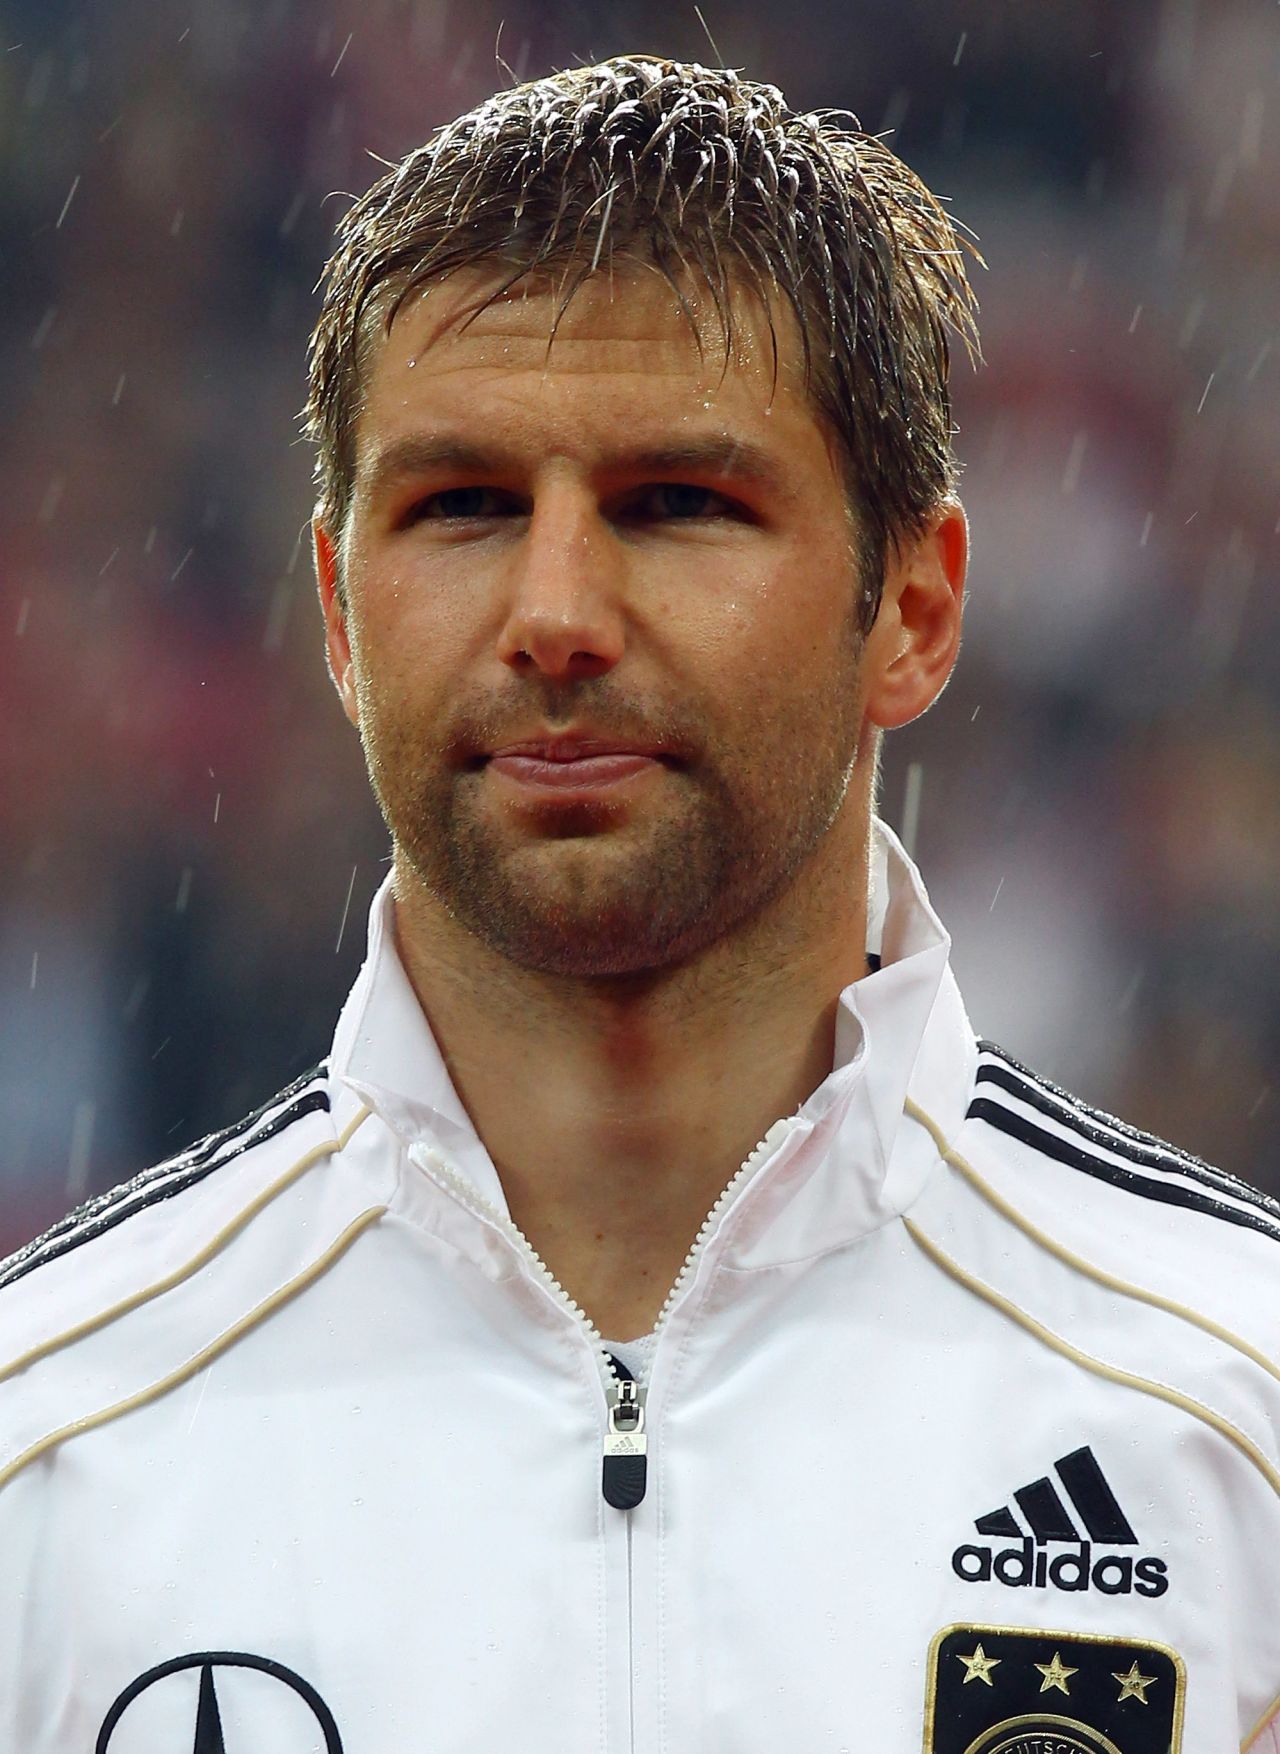 Hitzlsperger also enjoyed a successful international career, making 52 appearances for his country including a start for Germany in the final of Euro 2008 against Spain.